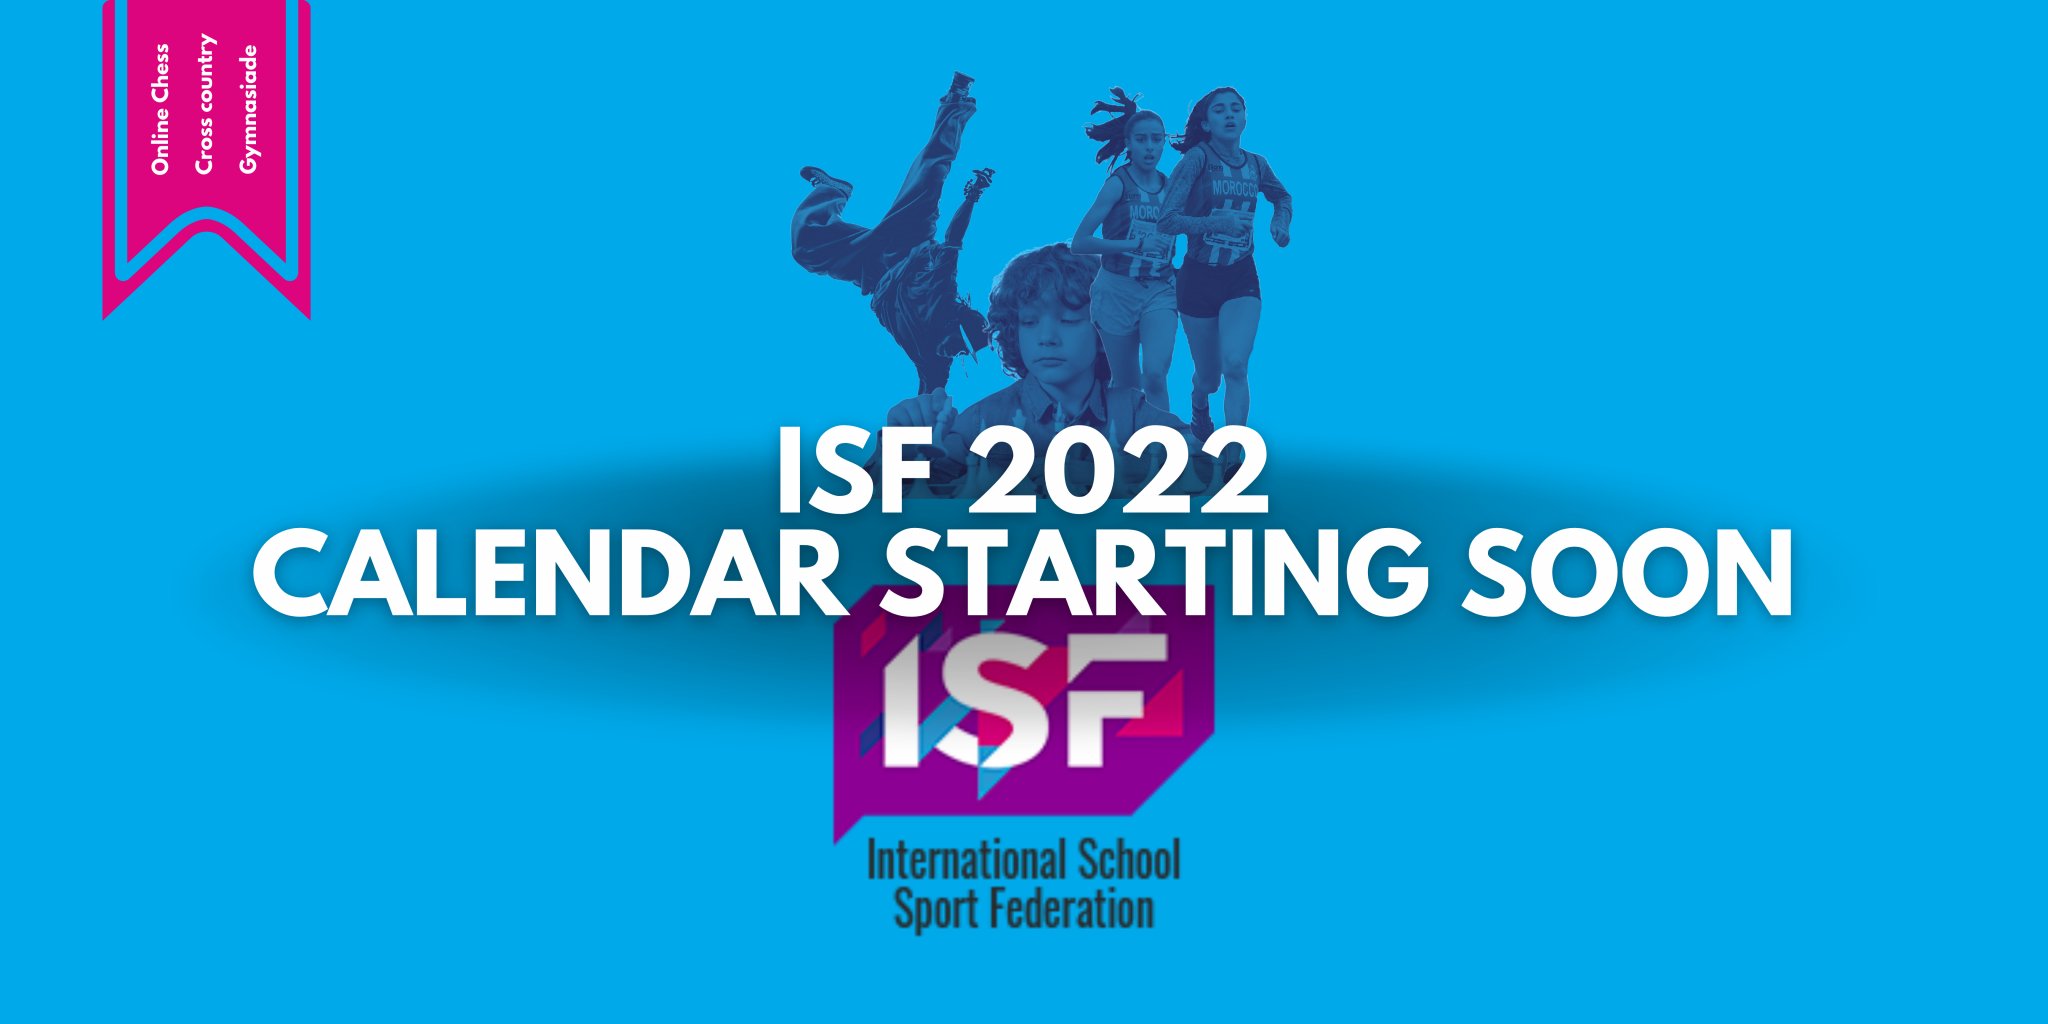 International School Sport Federation close to launching first events of 2022